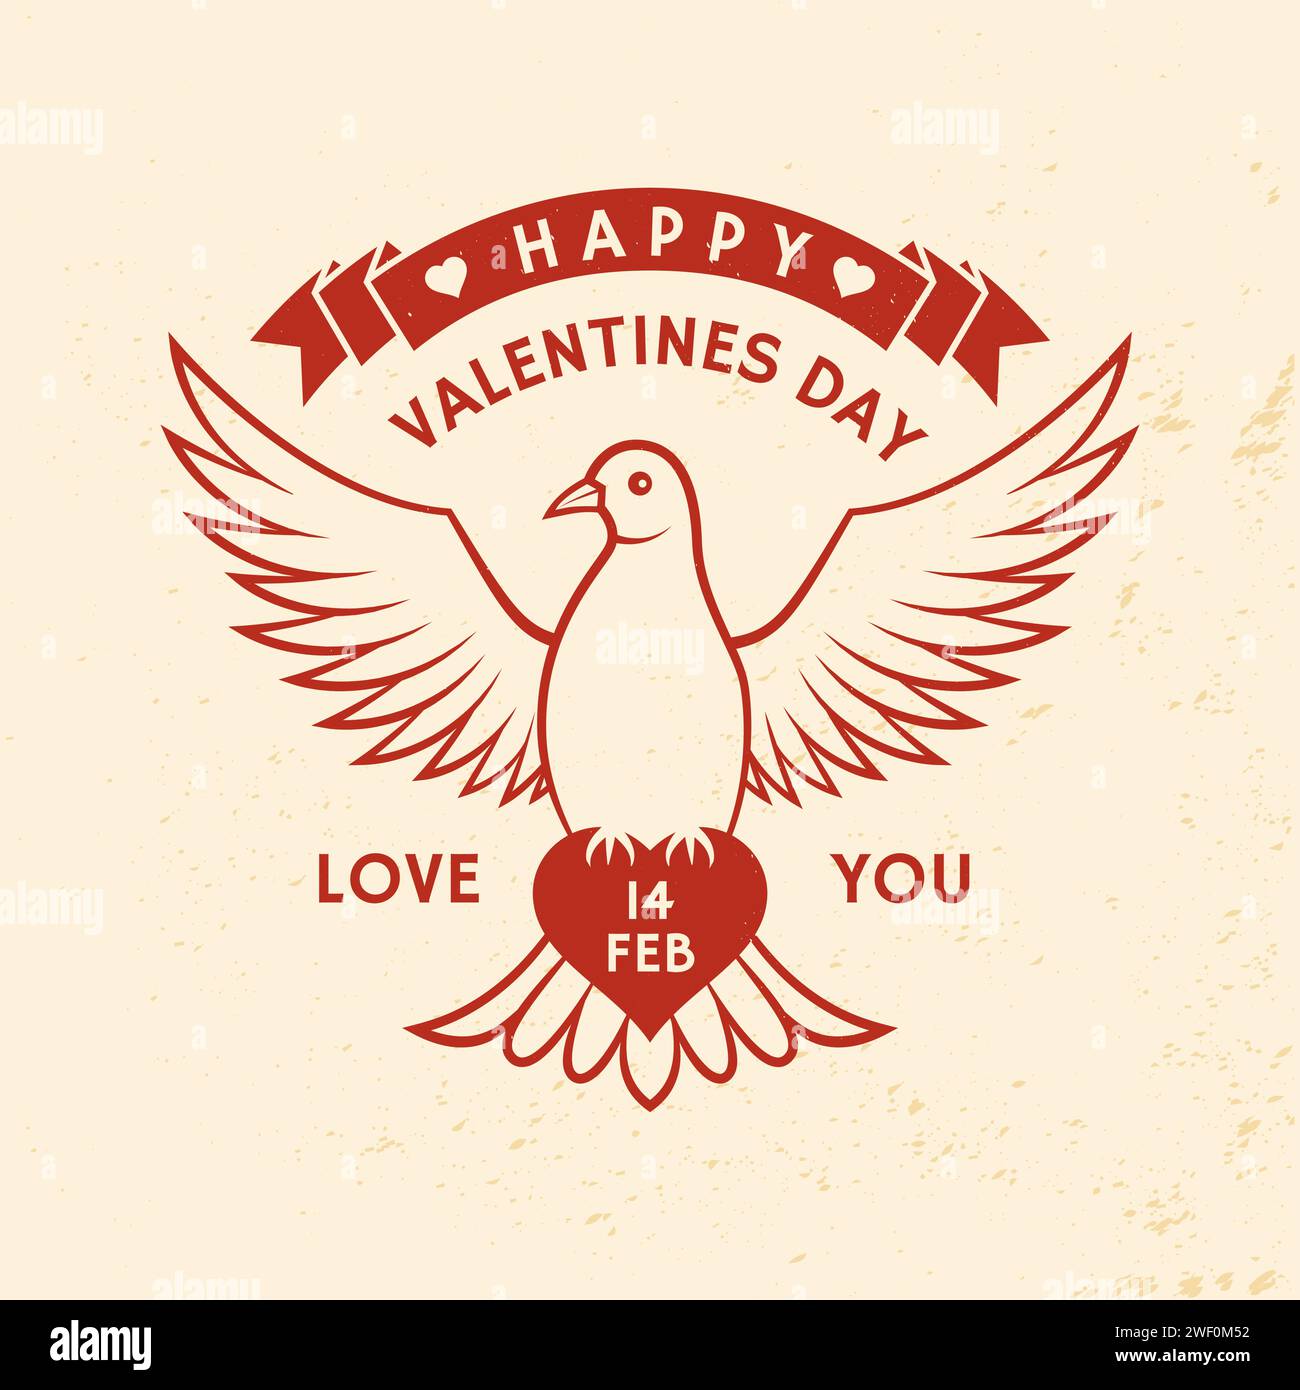 Happy valentines day. Vector illustration. Vintage with dove holding heart. Template for Valentine s Day greeting card, banner, poster, flyer with Stock Vector